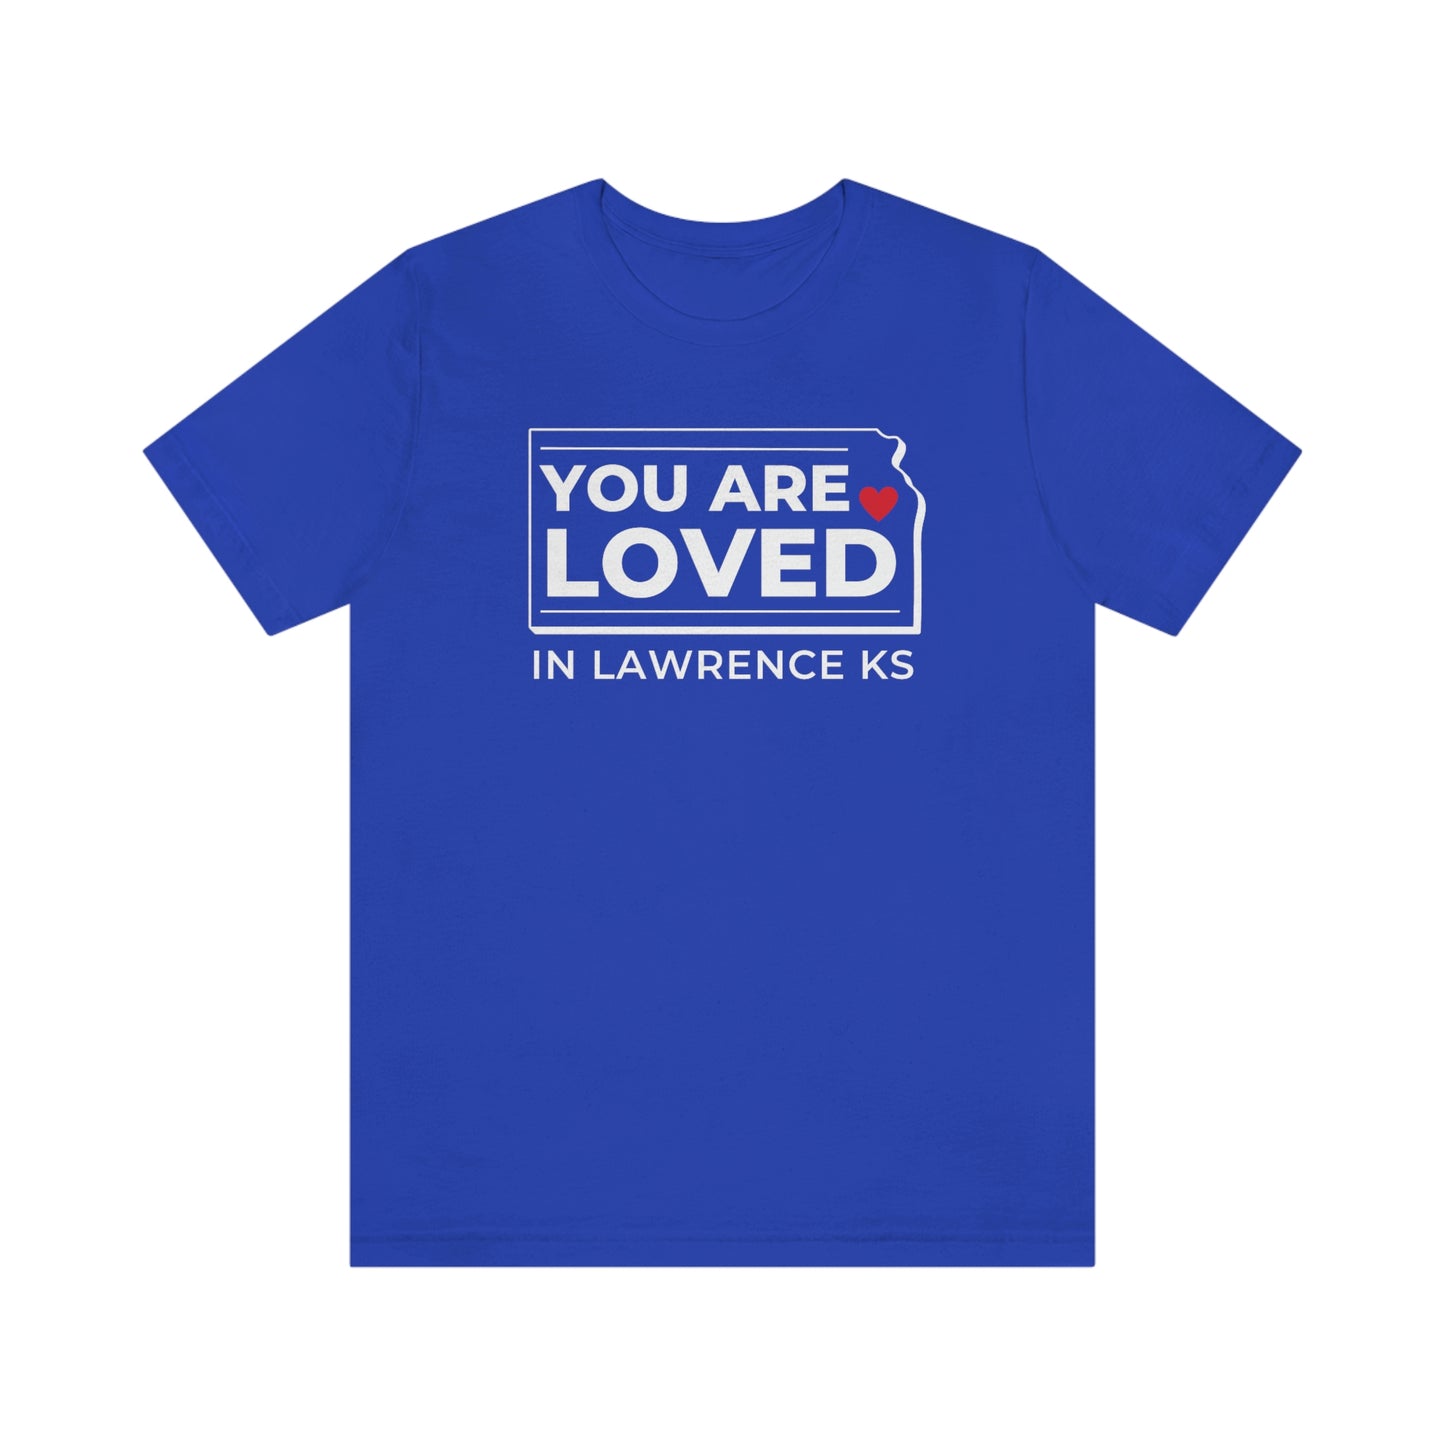 "YOU ARE LOVED ❤️ in Lawrence KS" T-Shirt [ROYAL BLUE]